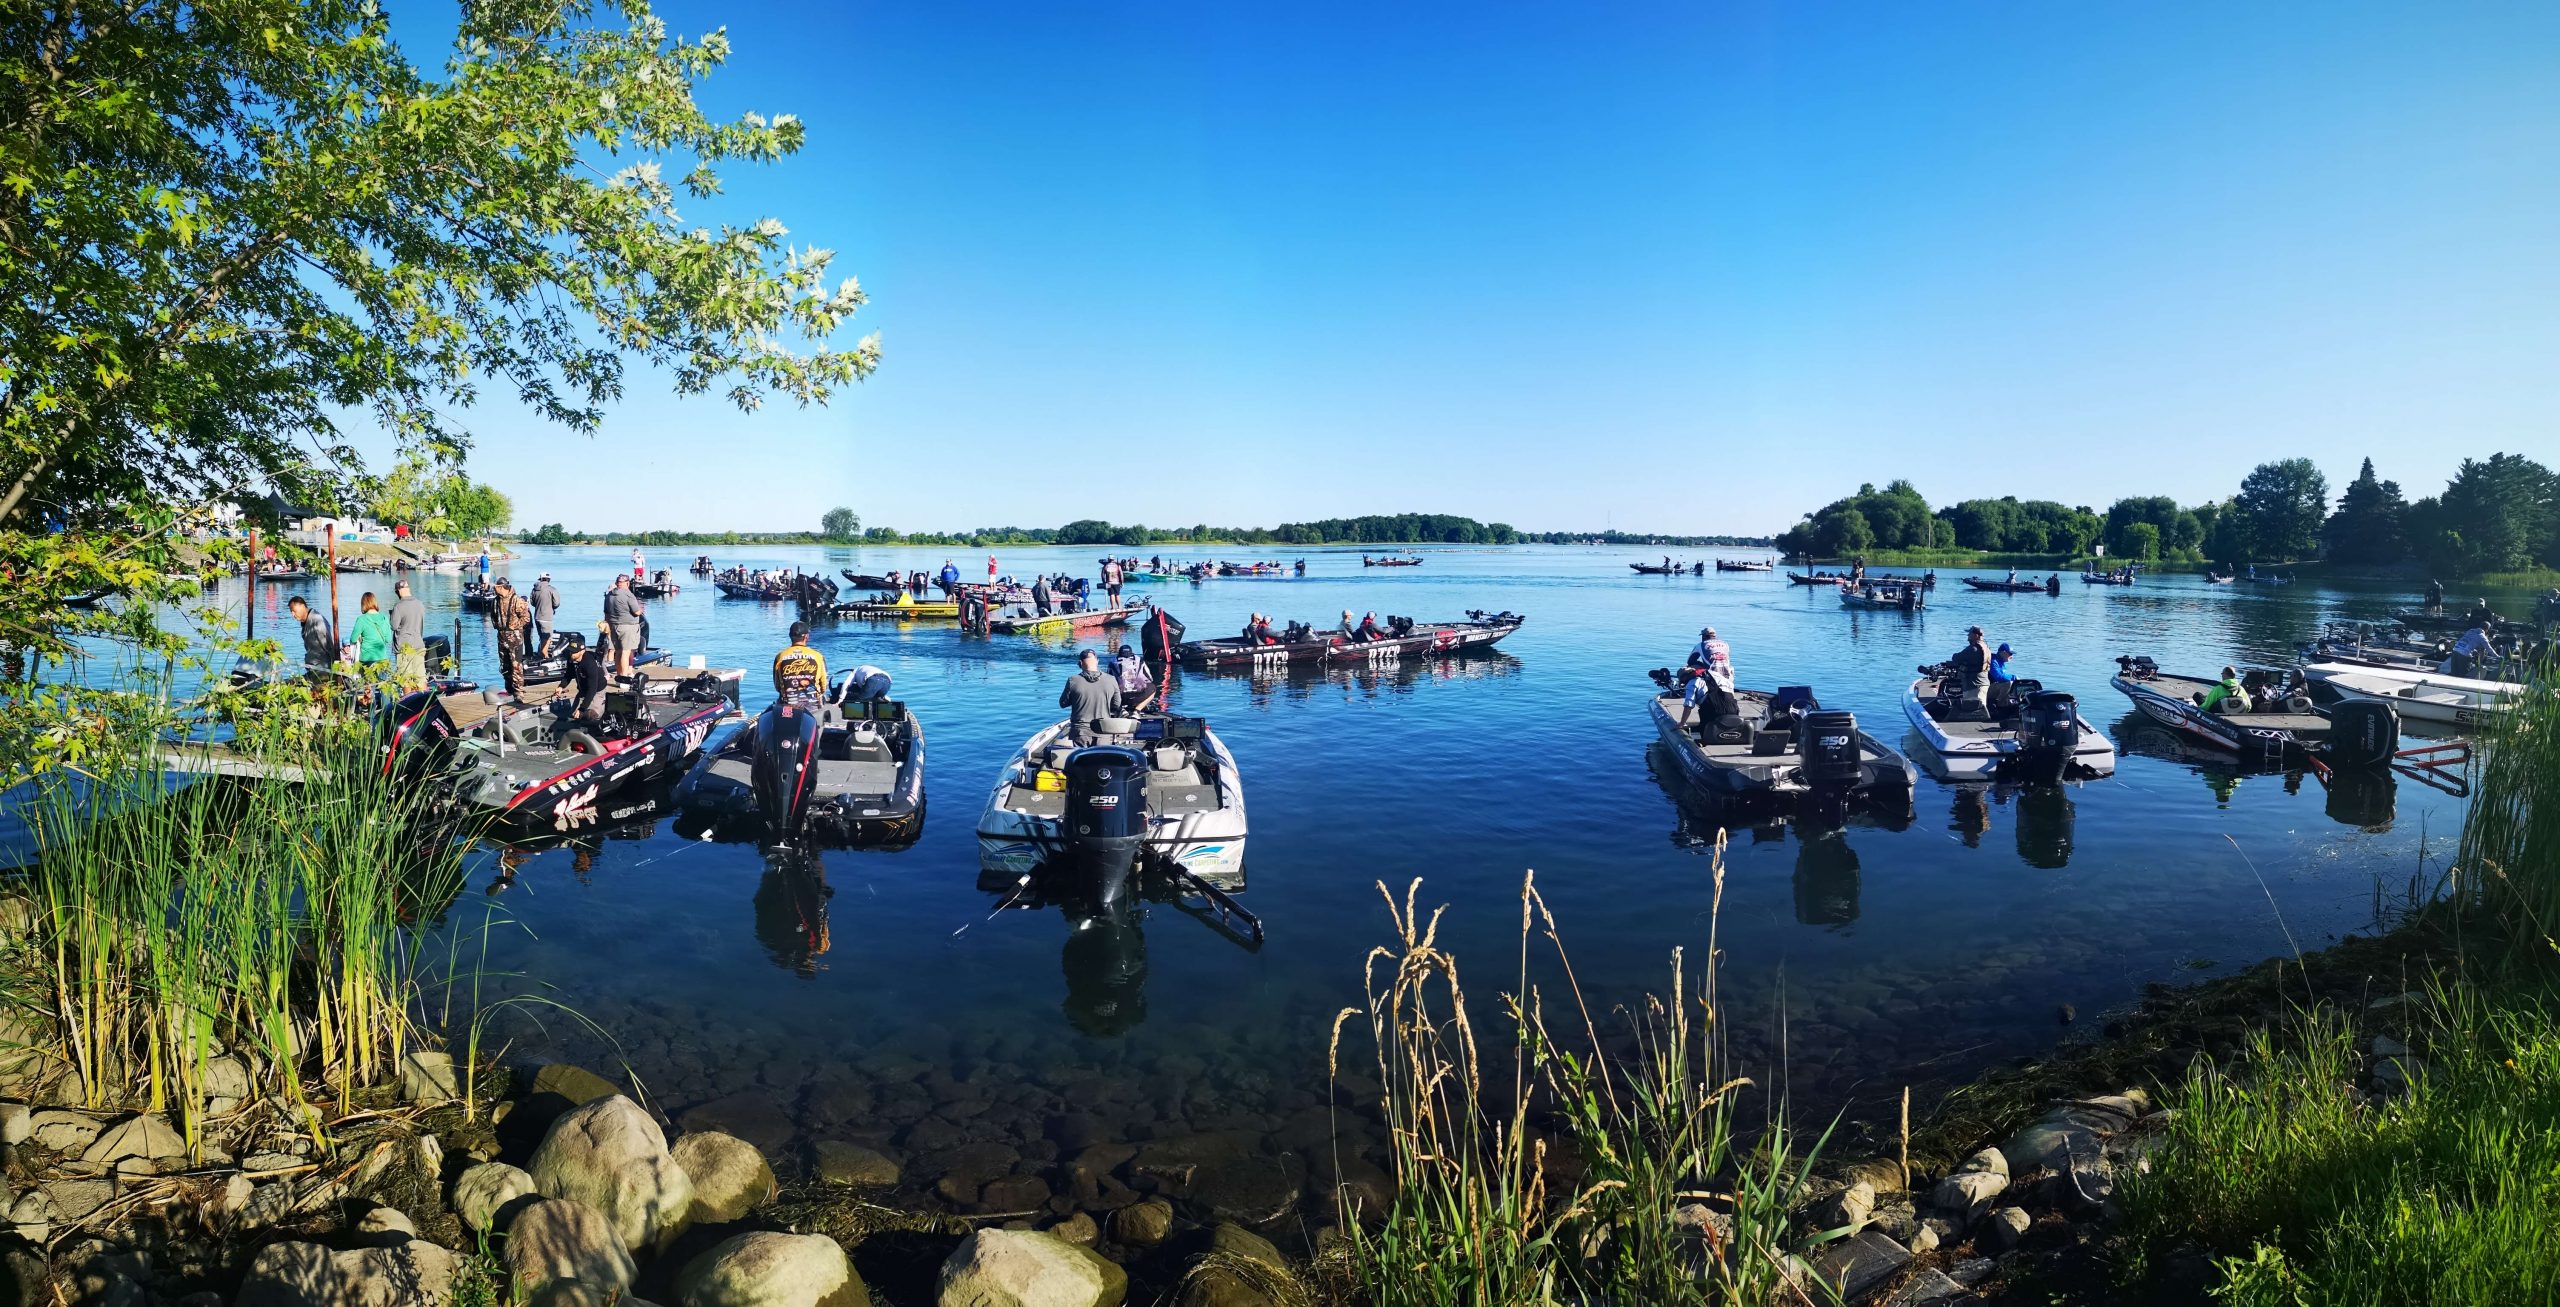 Elites get ready for Day 1 to start on the St. Lawrence. 